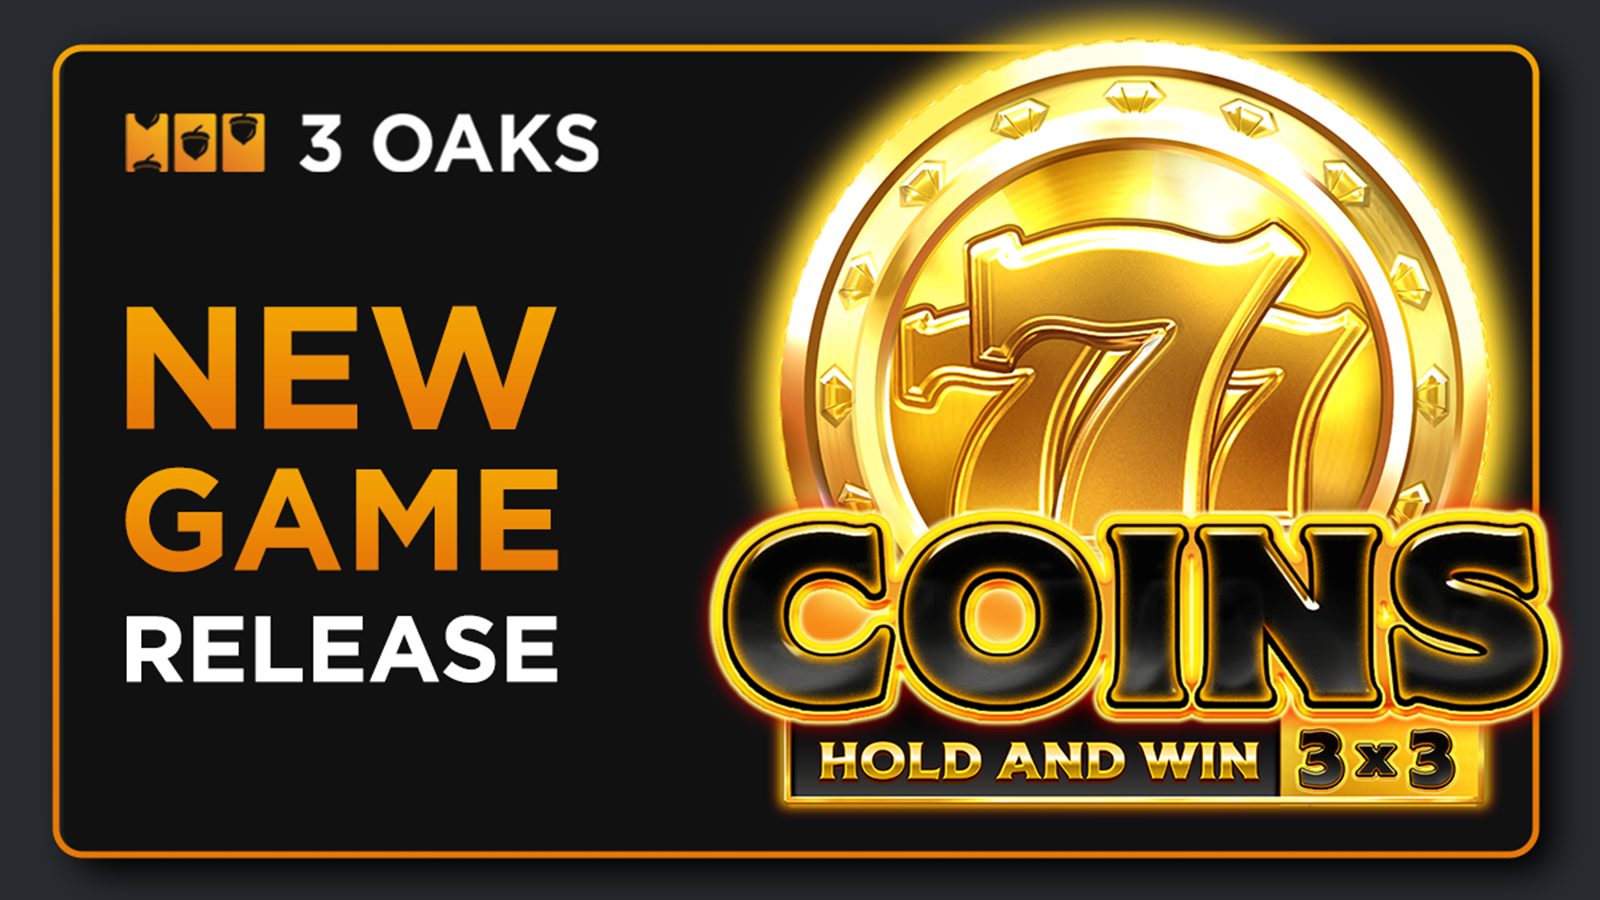 3 Oaks Gaming Releases 777 Coins